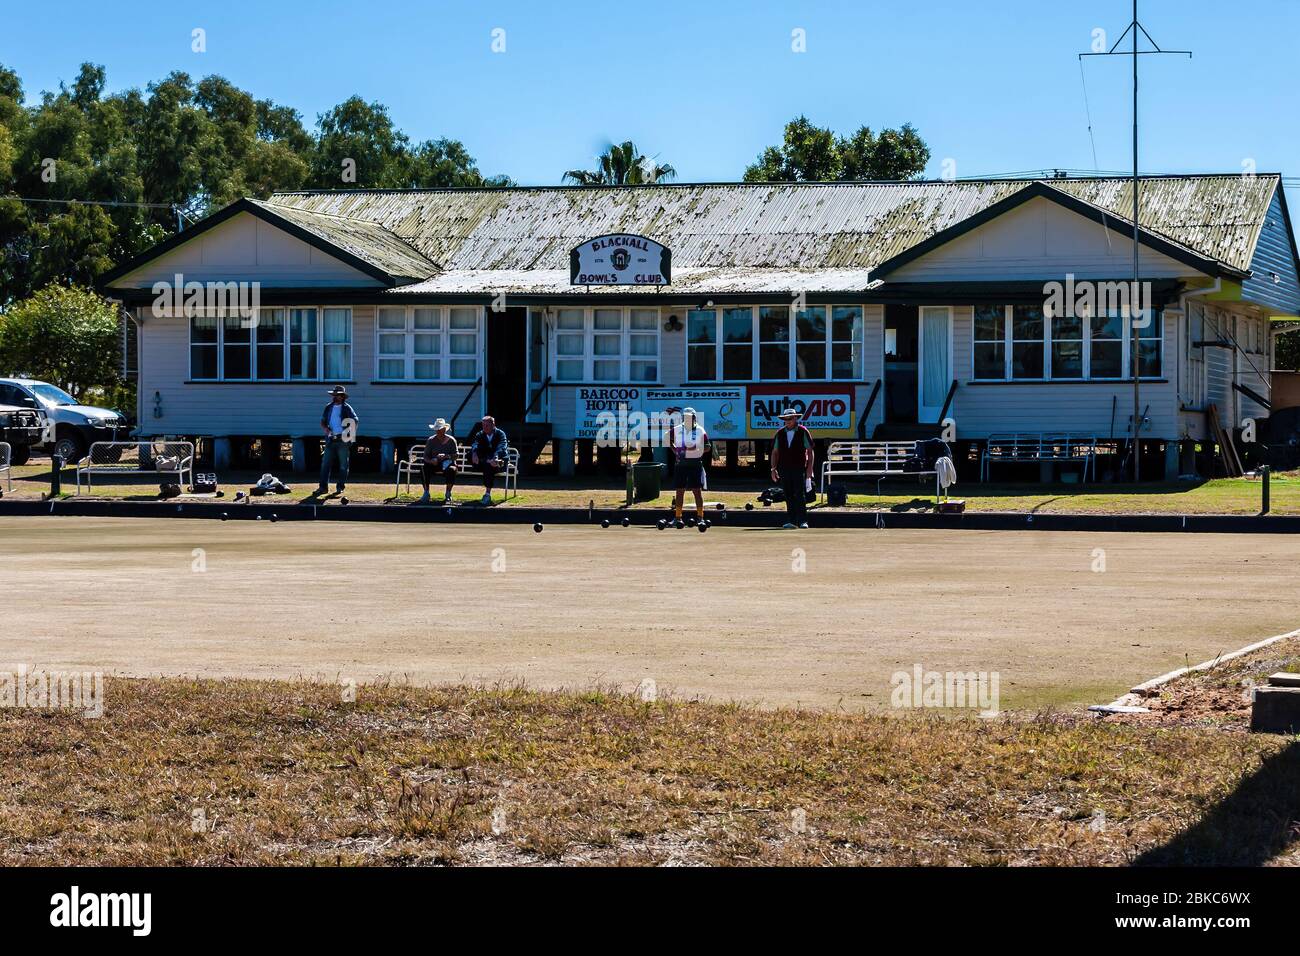 The Bowl's Club and local people playing lawn bowls, Blackall, Australia Stock Photo